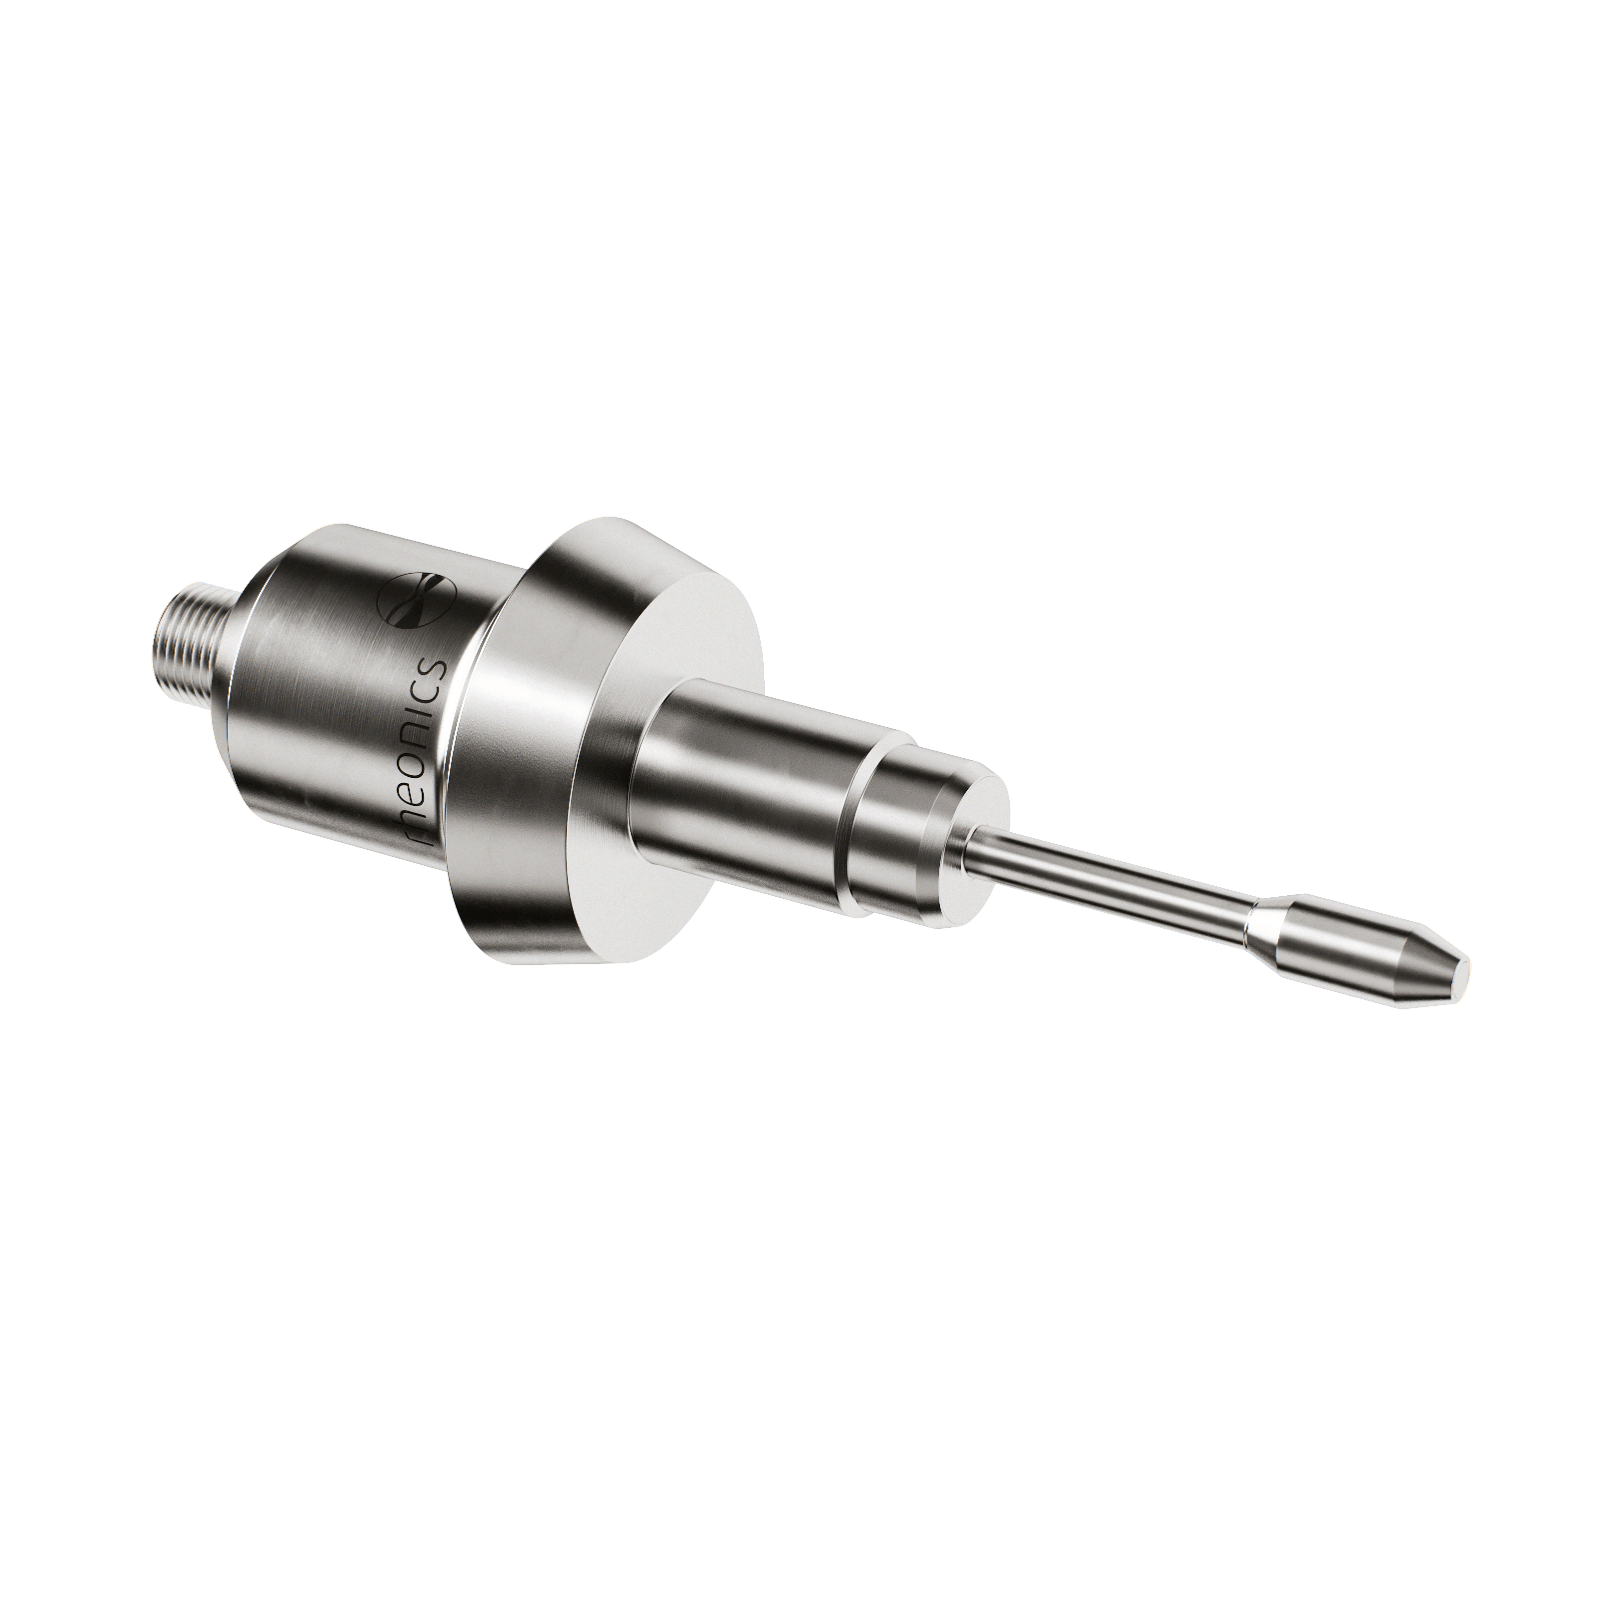 SRV - DIN 11851 - Inline process viscosity sensor for hygienic medical pharmaceutical chocolate batter food mixing applications